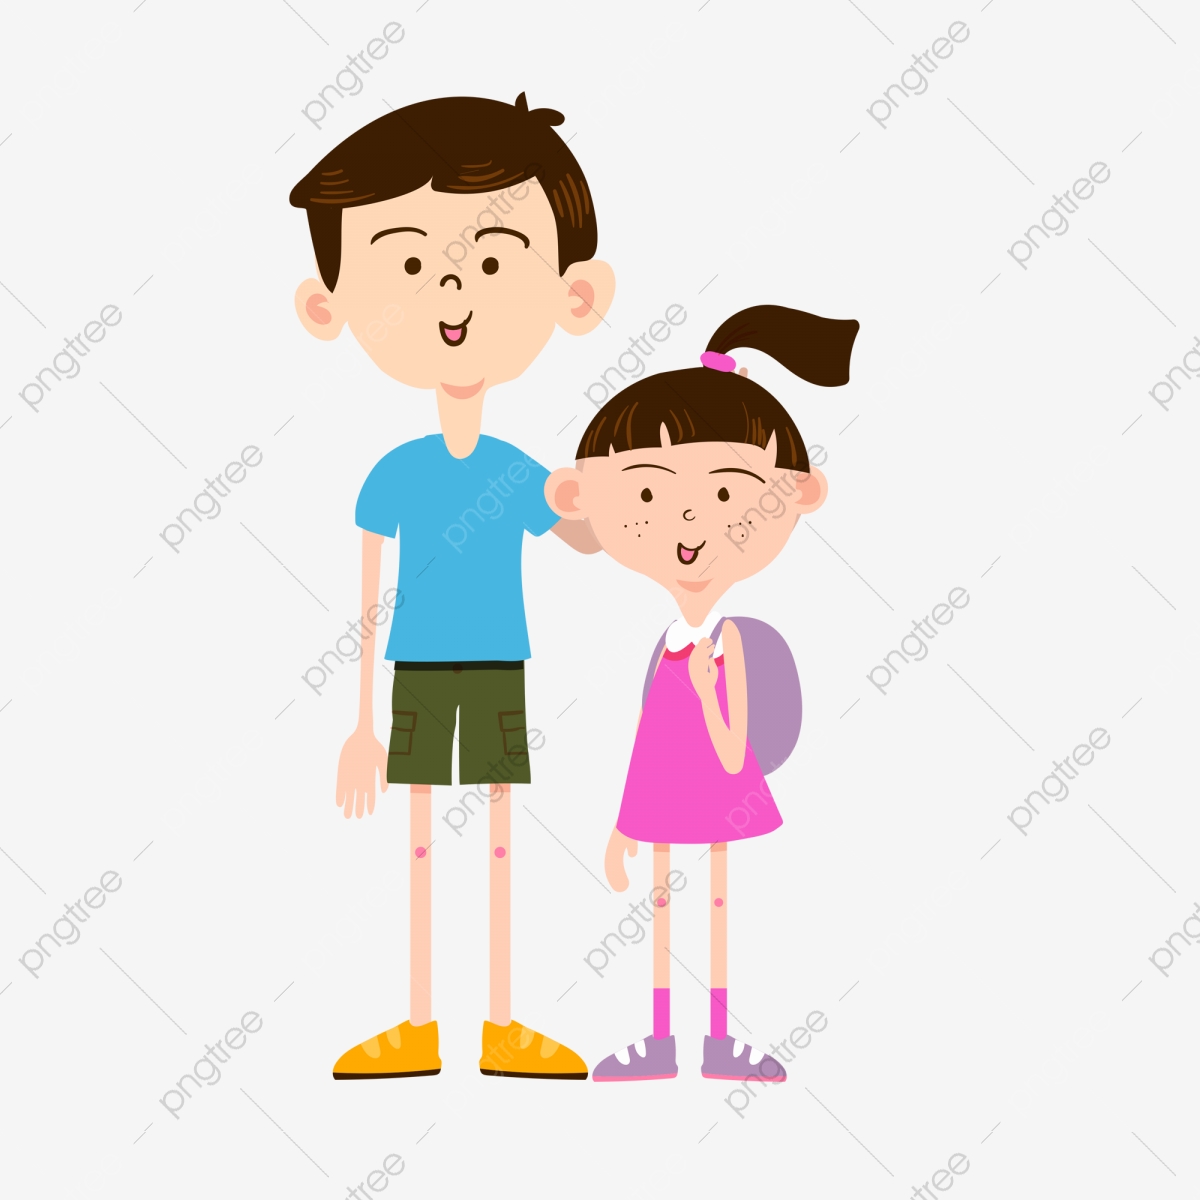 brother clipart person